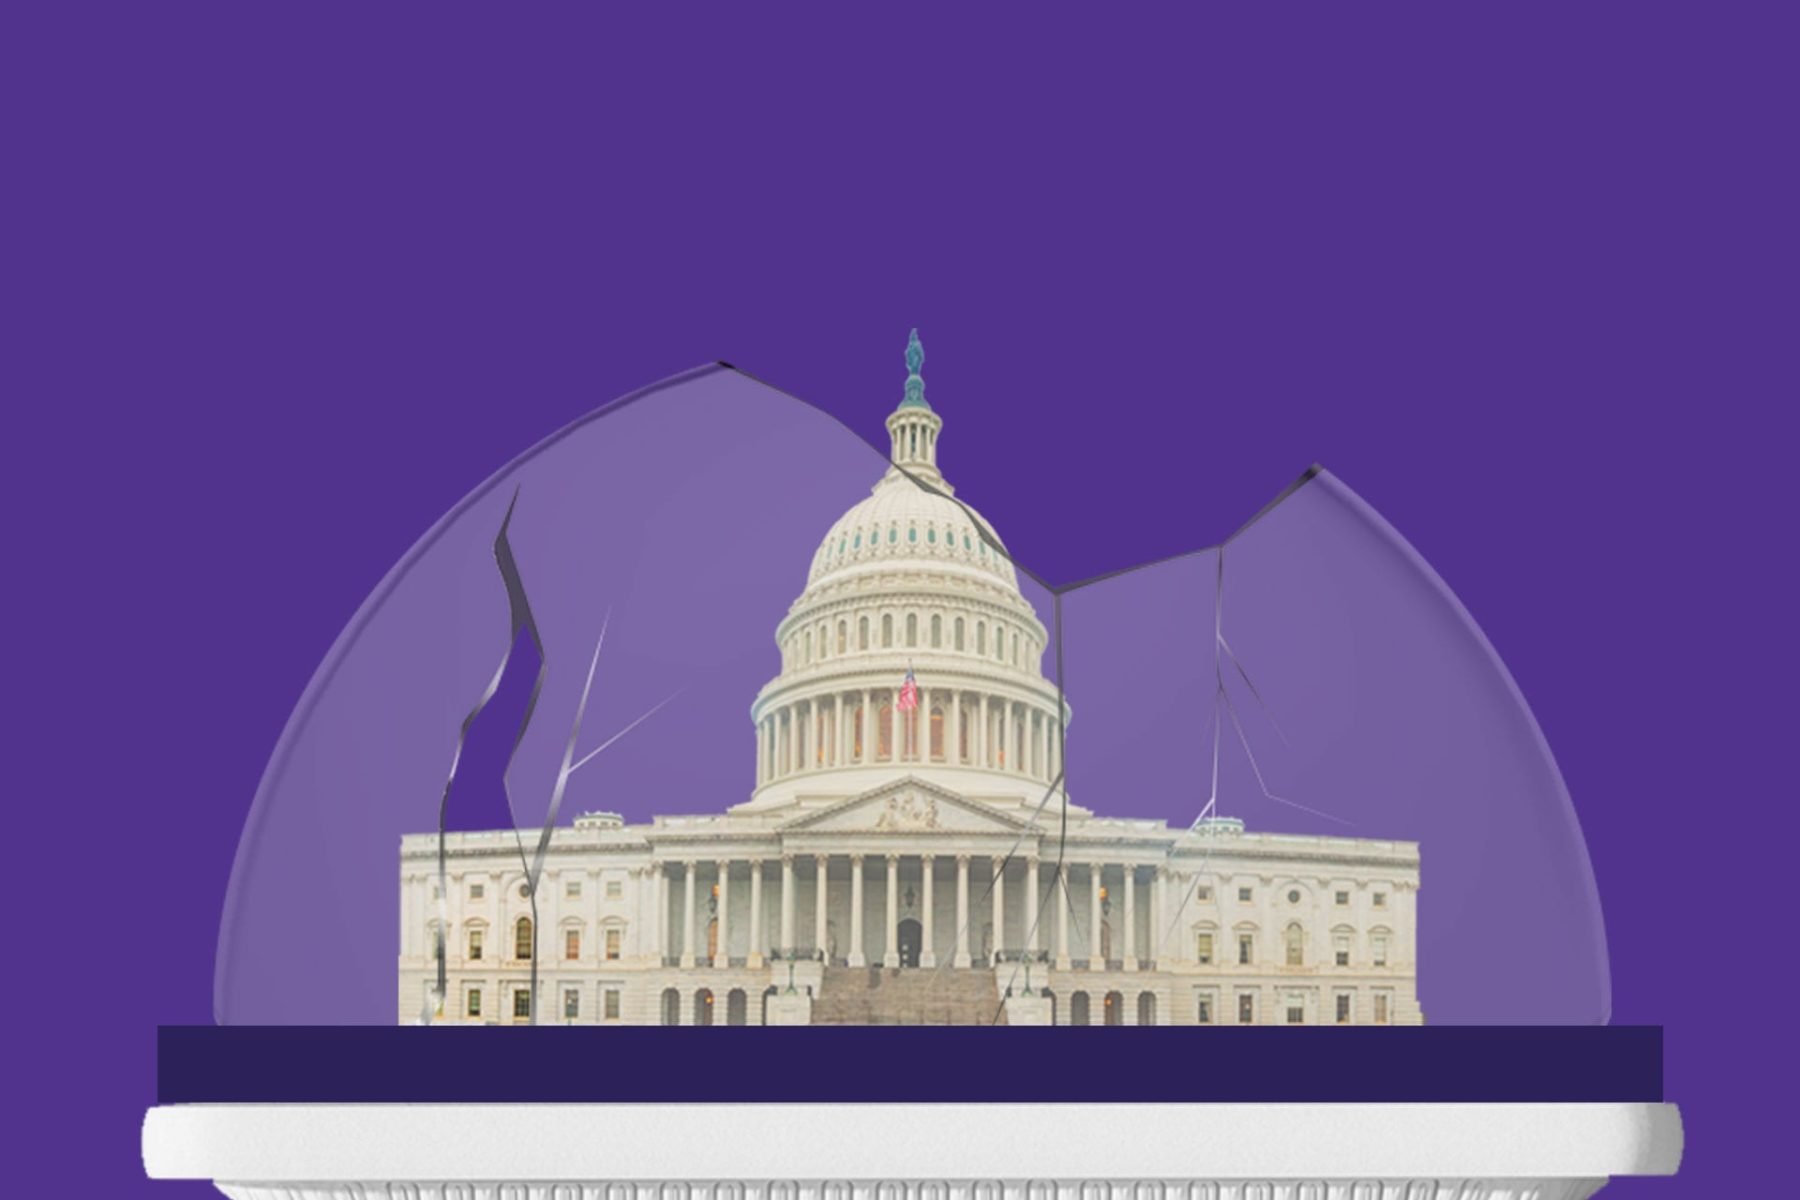 An photo illustration of the U.S. Capitol building in a shattered dome resembling a snow globe.